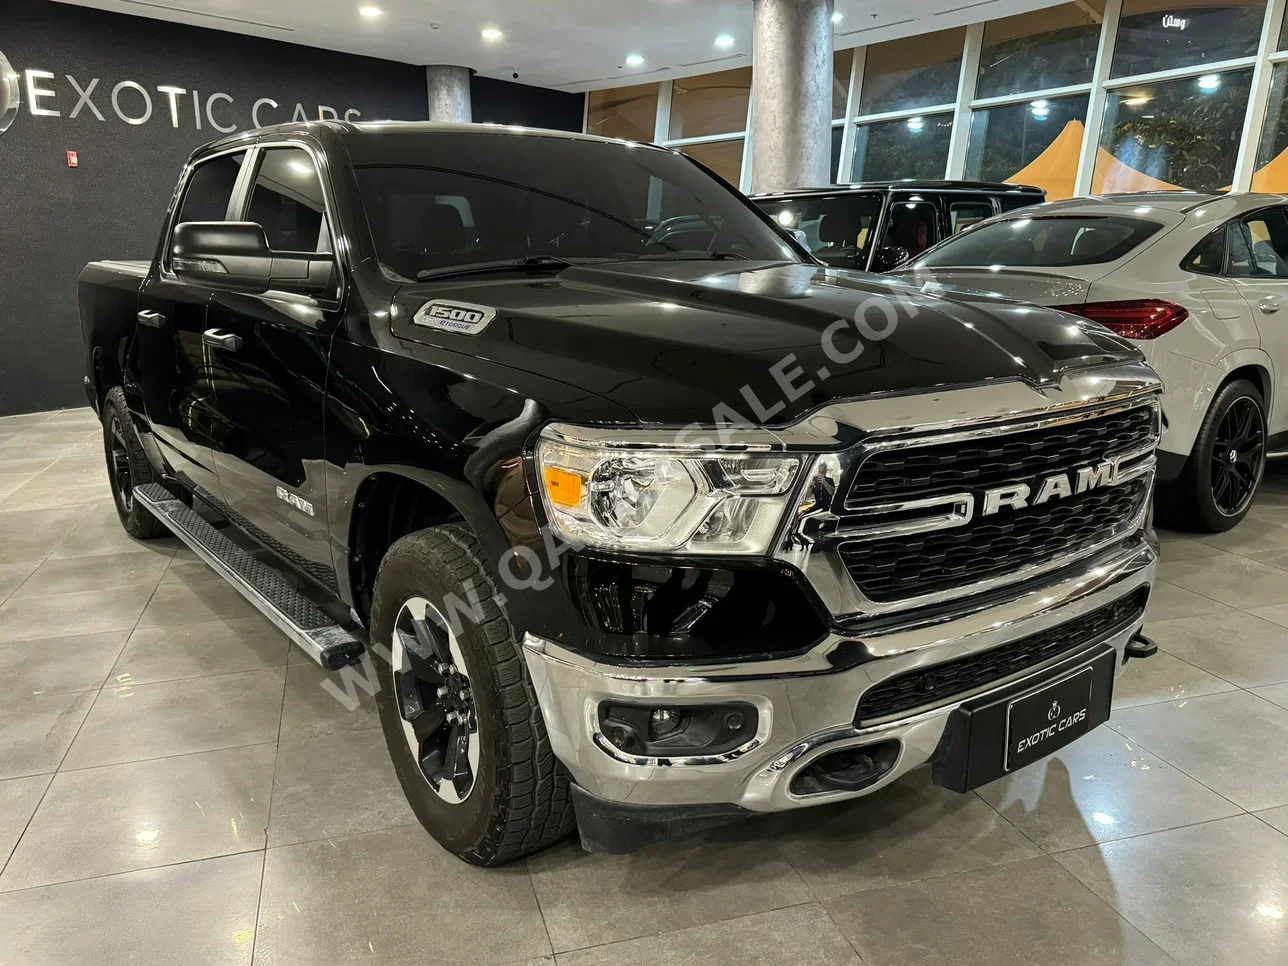 Dodge  Ram  Big Horn  2023  Automatic  4,500 Km  8 Cylinder  Four Wheel Drive (4WD)  Pick Up  Black  With Warranty